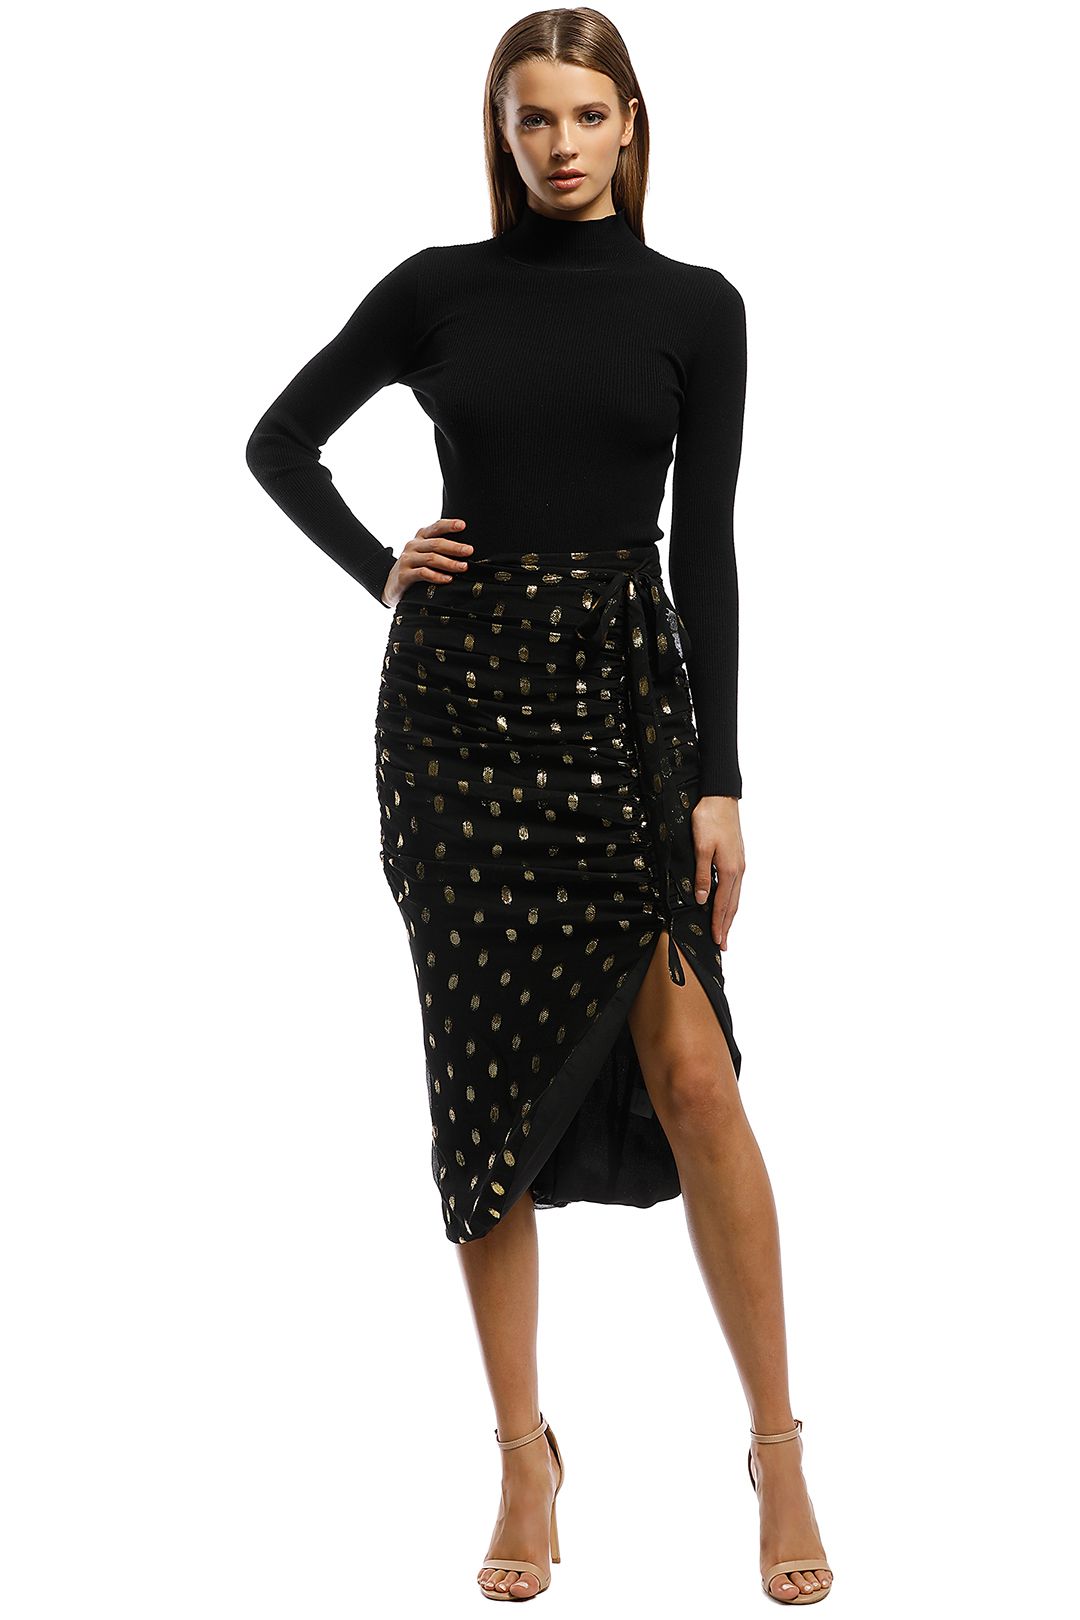 Ministry of Style - Sweet Surrender Skirt - Black Gold - Front